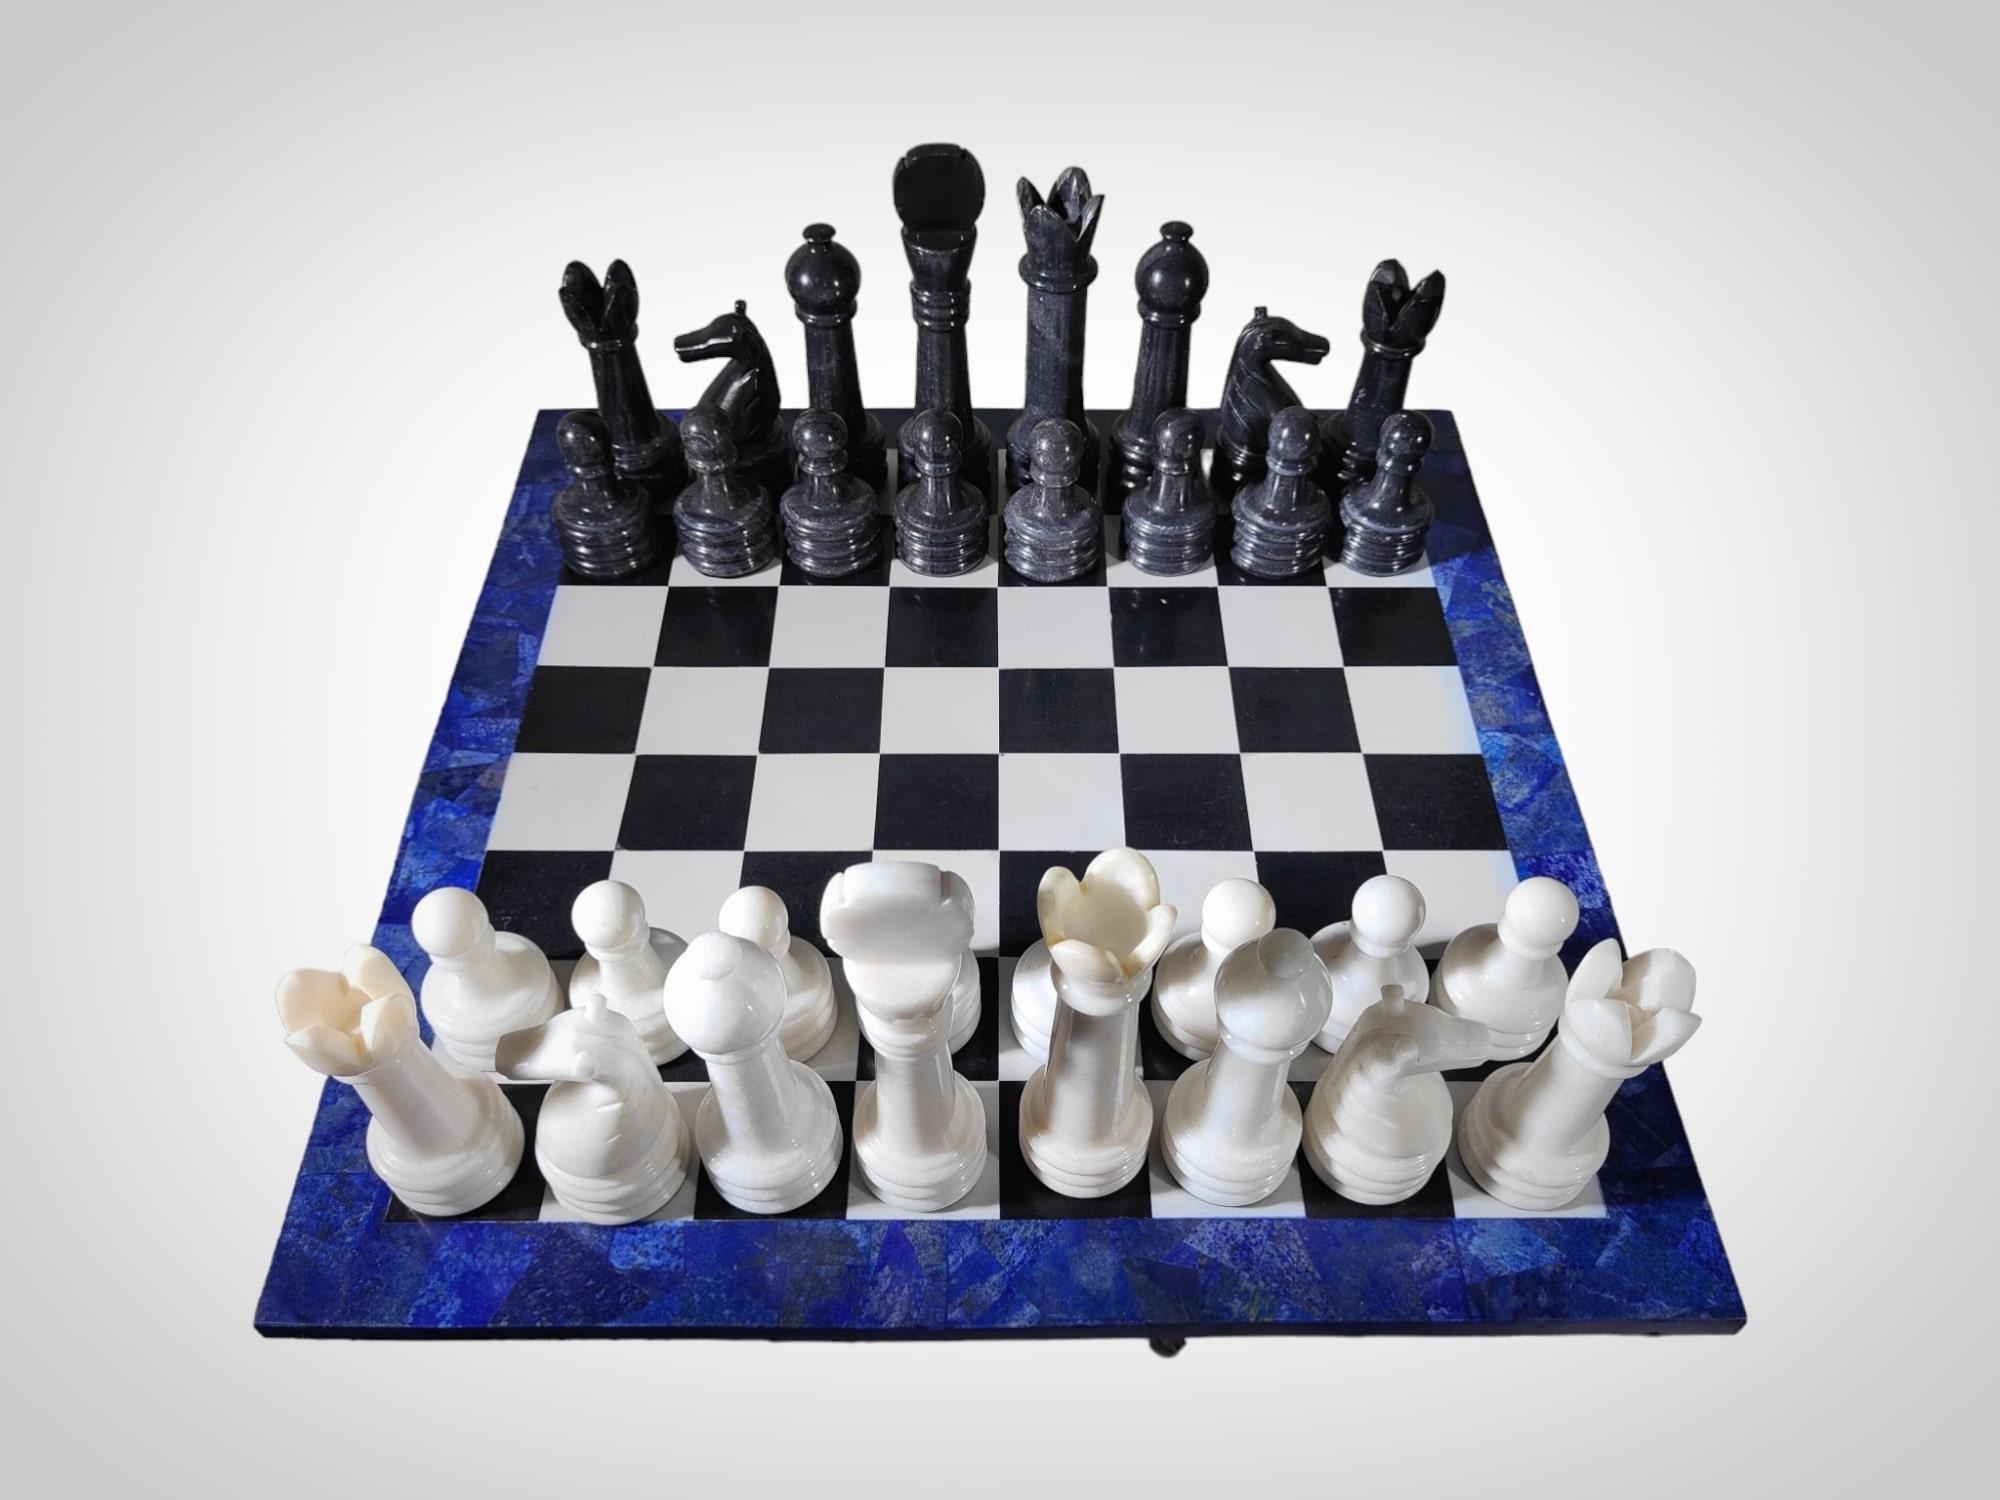 Italian Chess Table from the 1950s - Lapis Lazuli, Marble, and Dragon-Shaped  For Sale 3